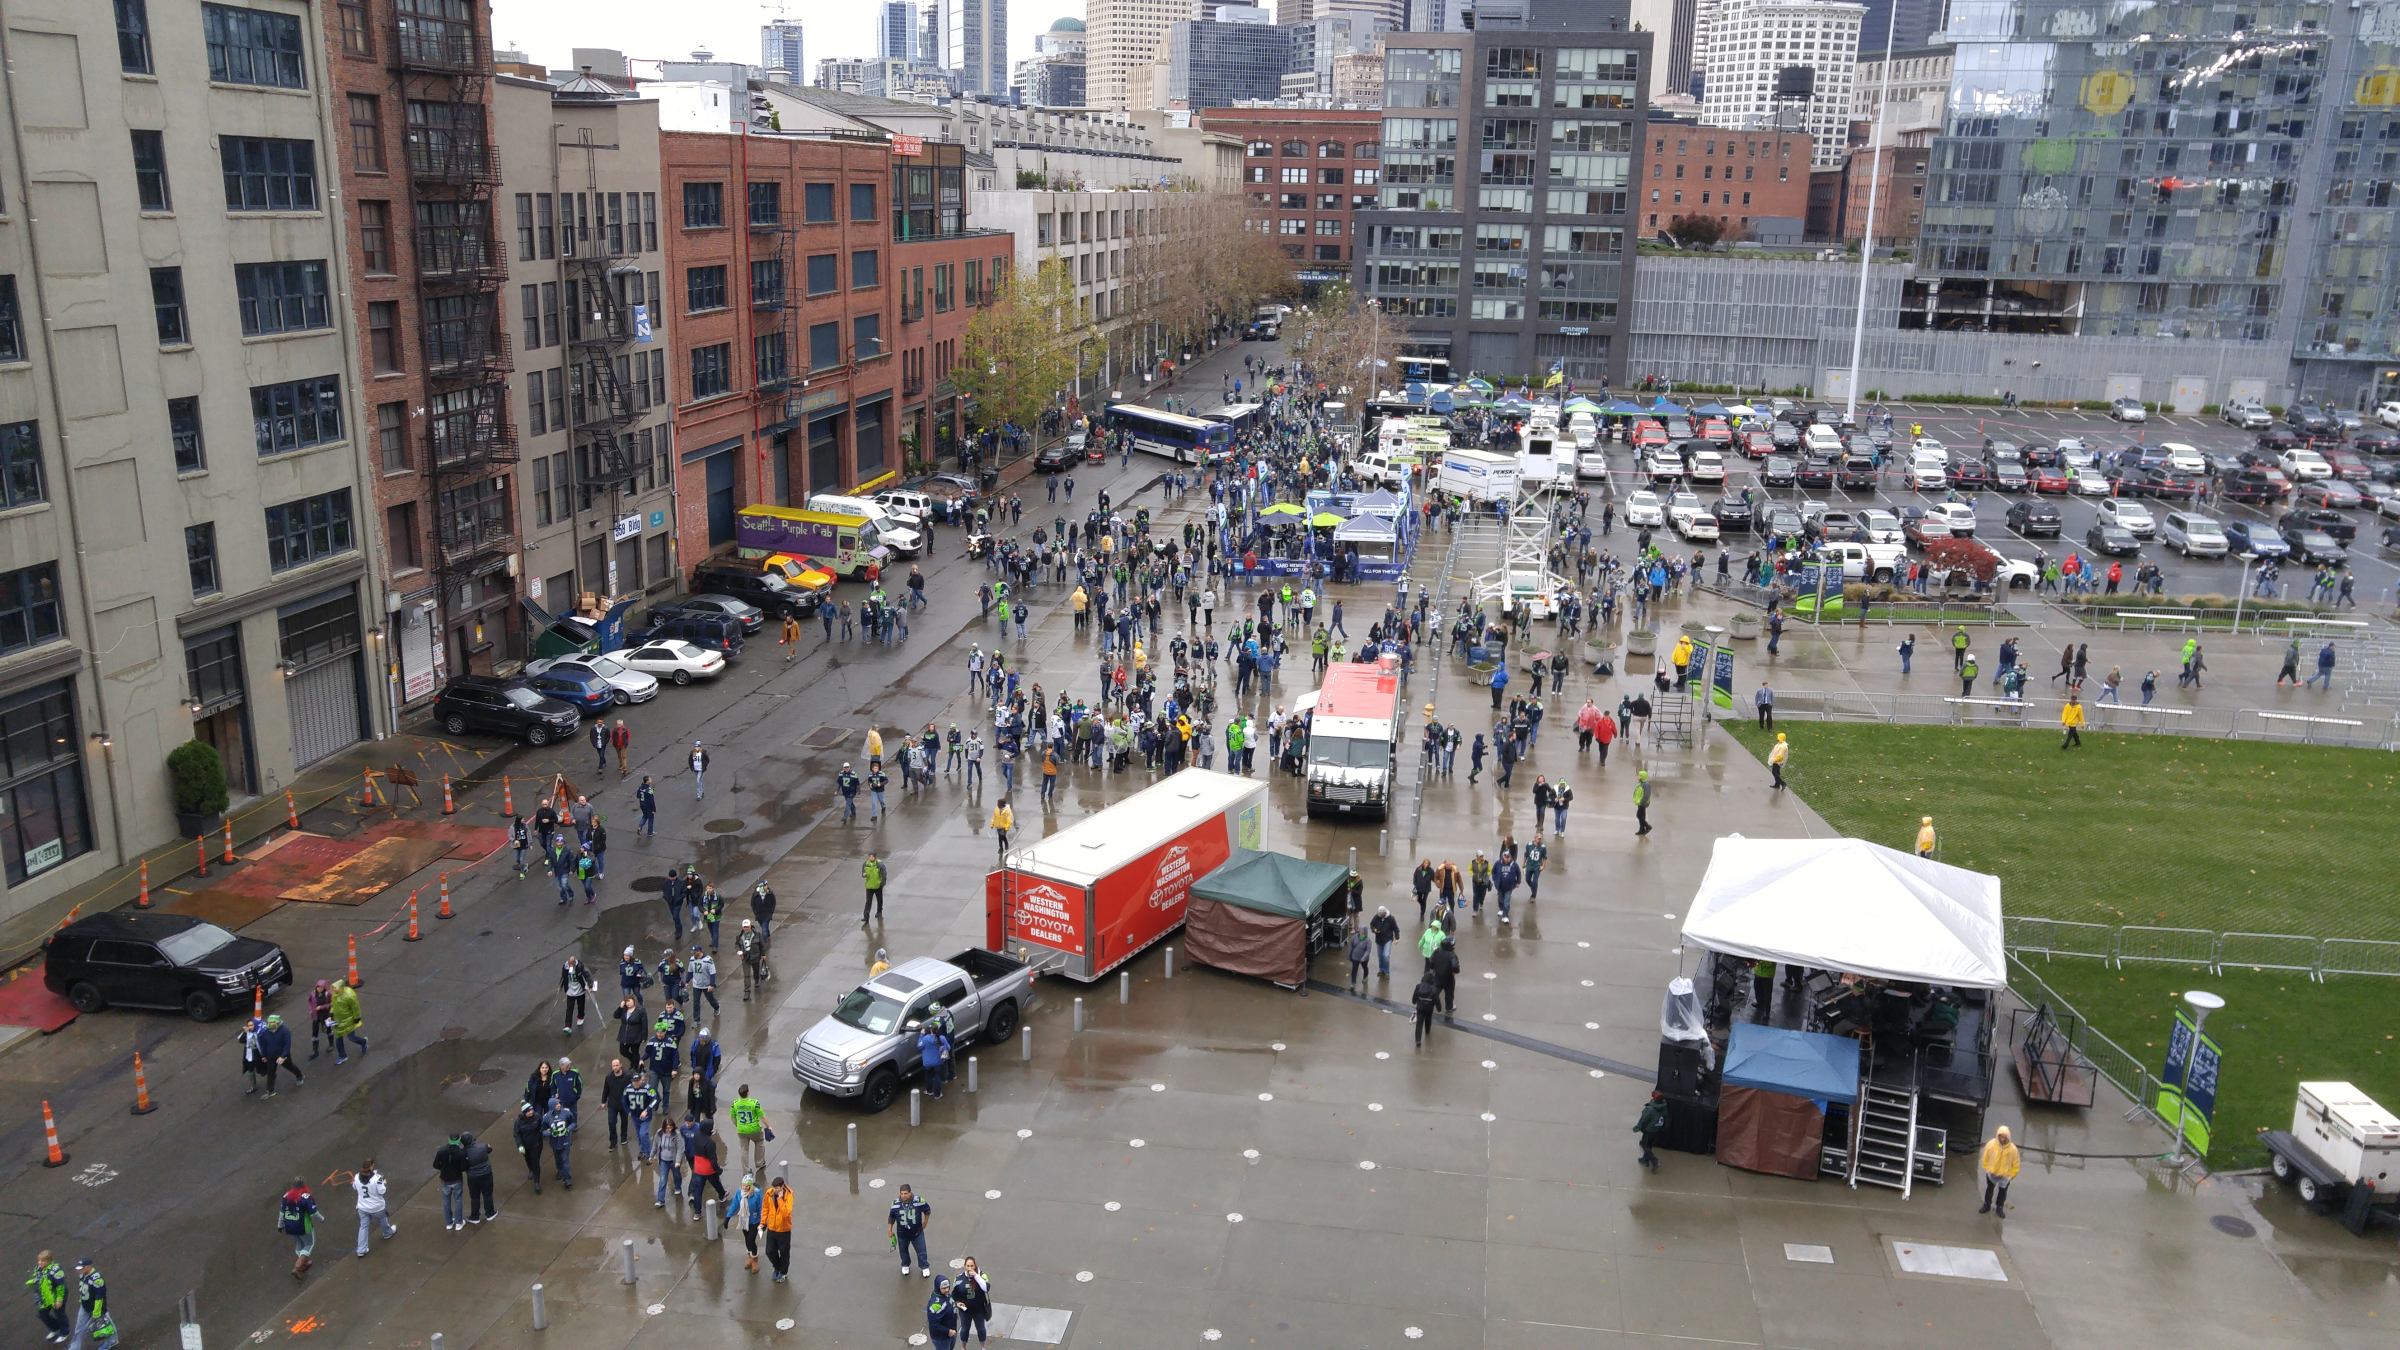 A view from a surveillance camera of a crowd of Seattle football fans on the street.